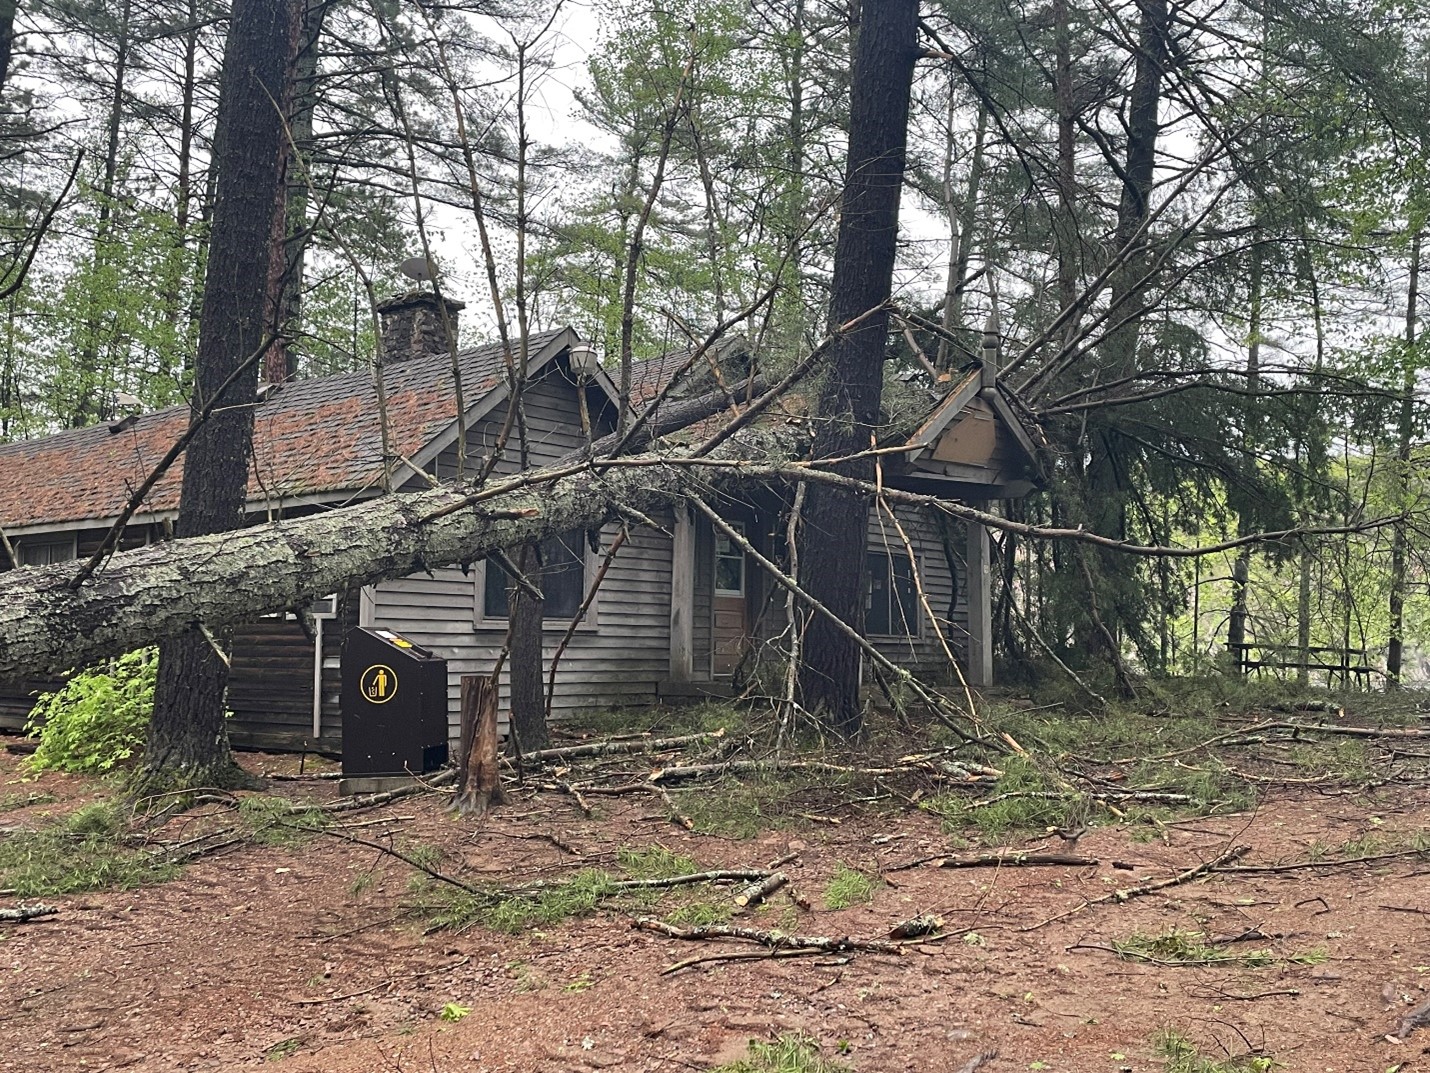 A large fallen tree resting on the roof of a park building